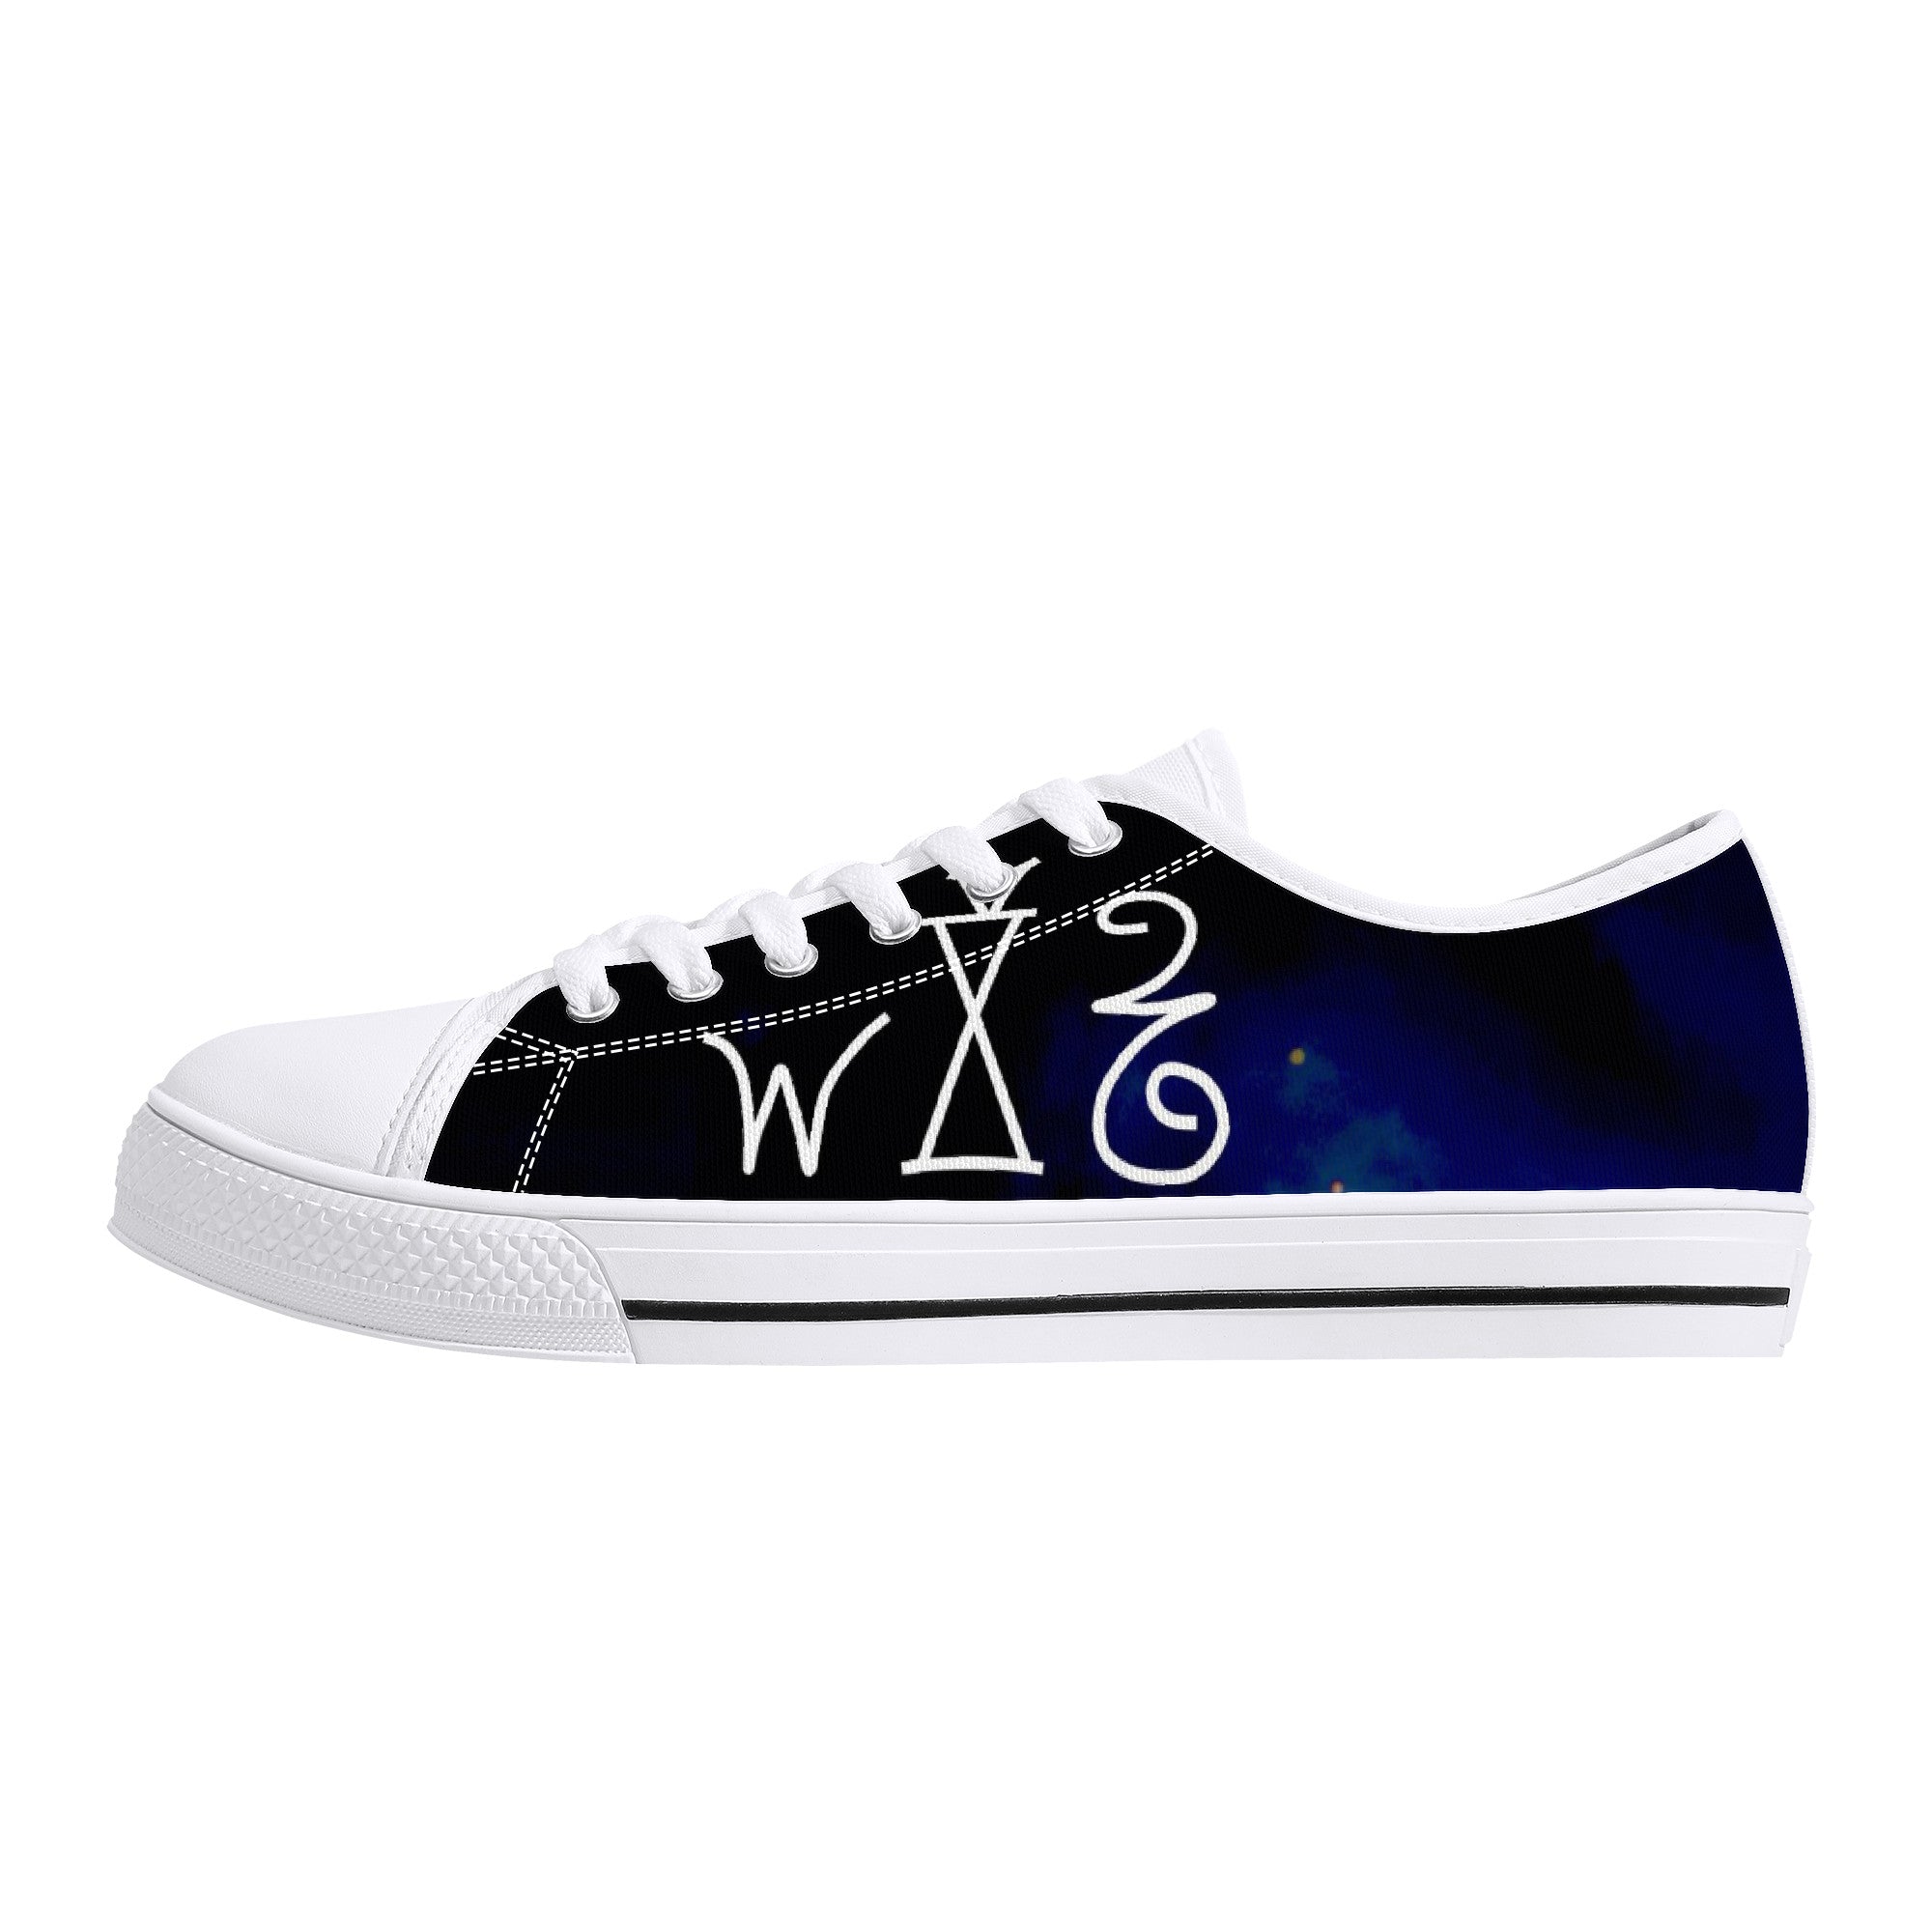 They will teach us | Customized Low-Top Canvas Shoes - White - Shoe Zero